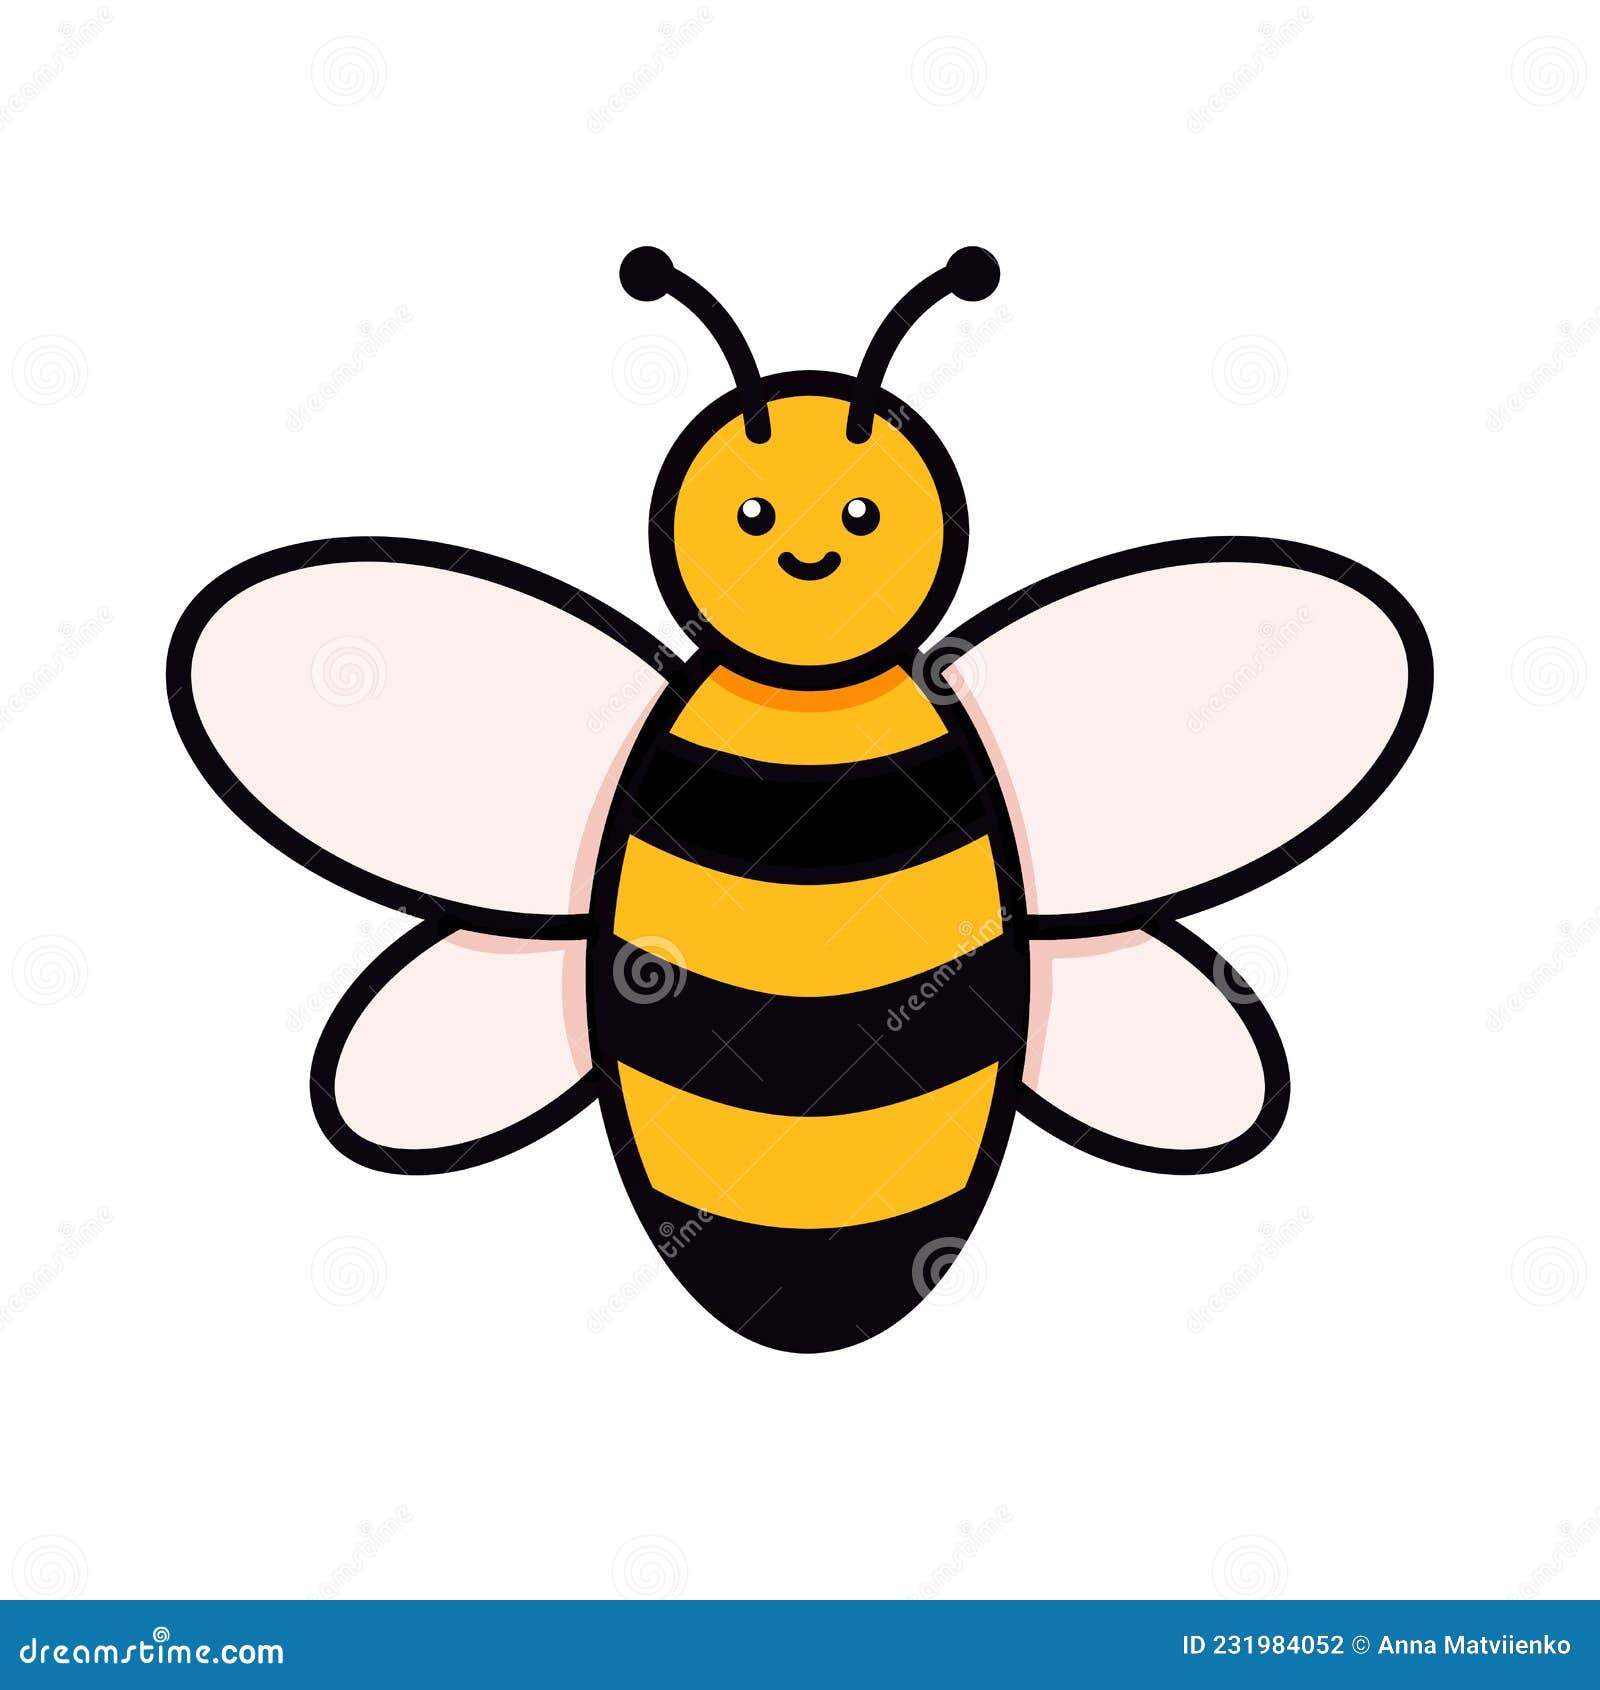 How to draw a cute honey bee - Coloring honey bee - Drawing for kids -  YouTube